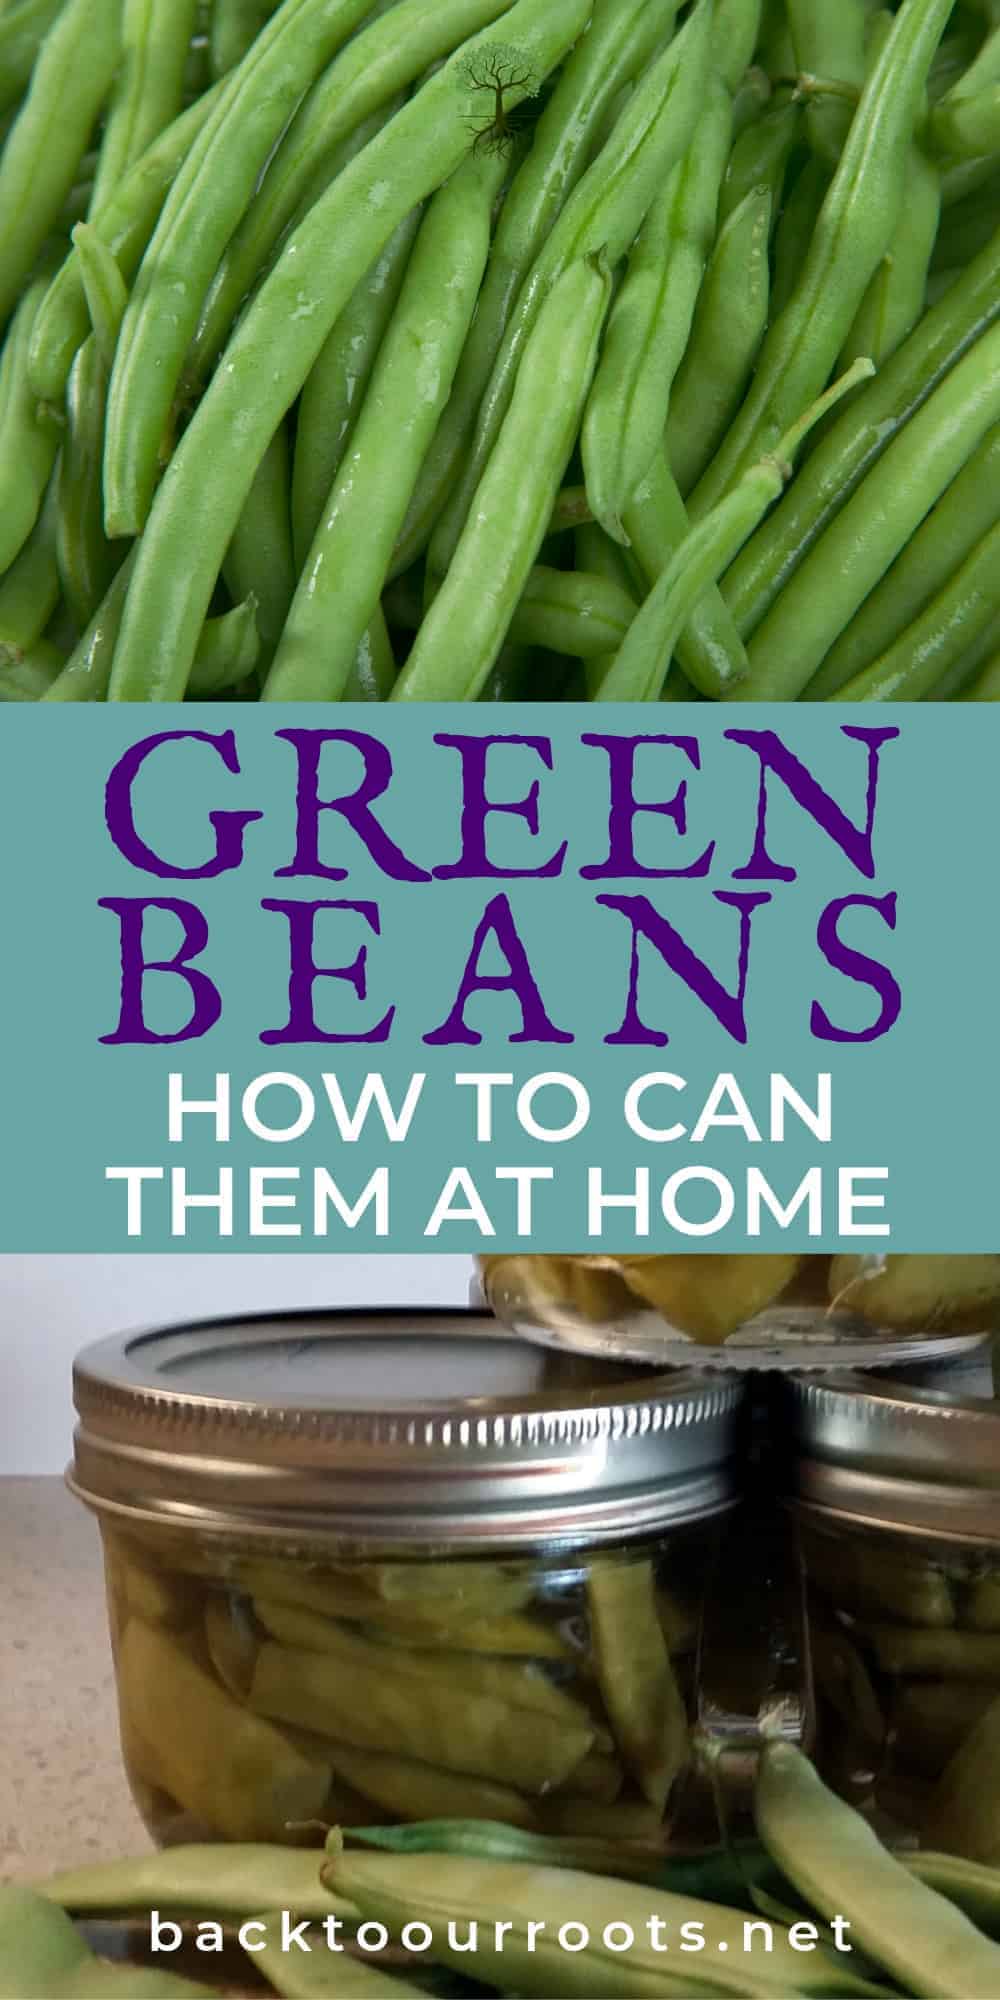 How to Can Green Beans